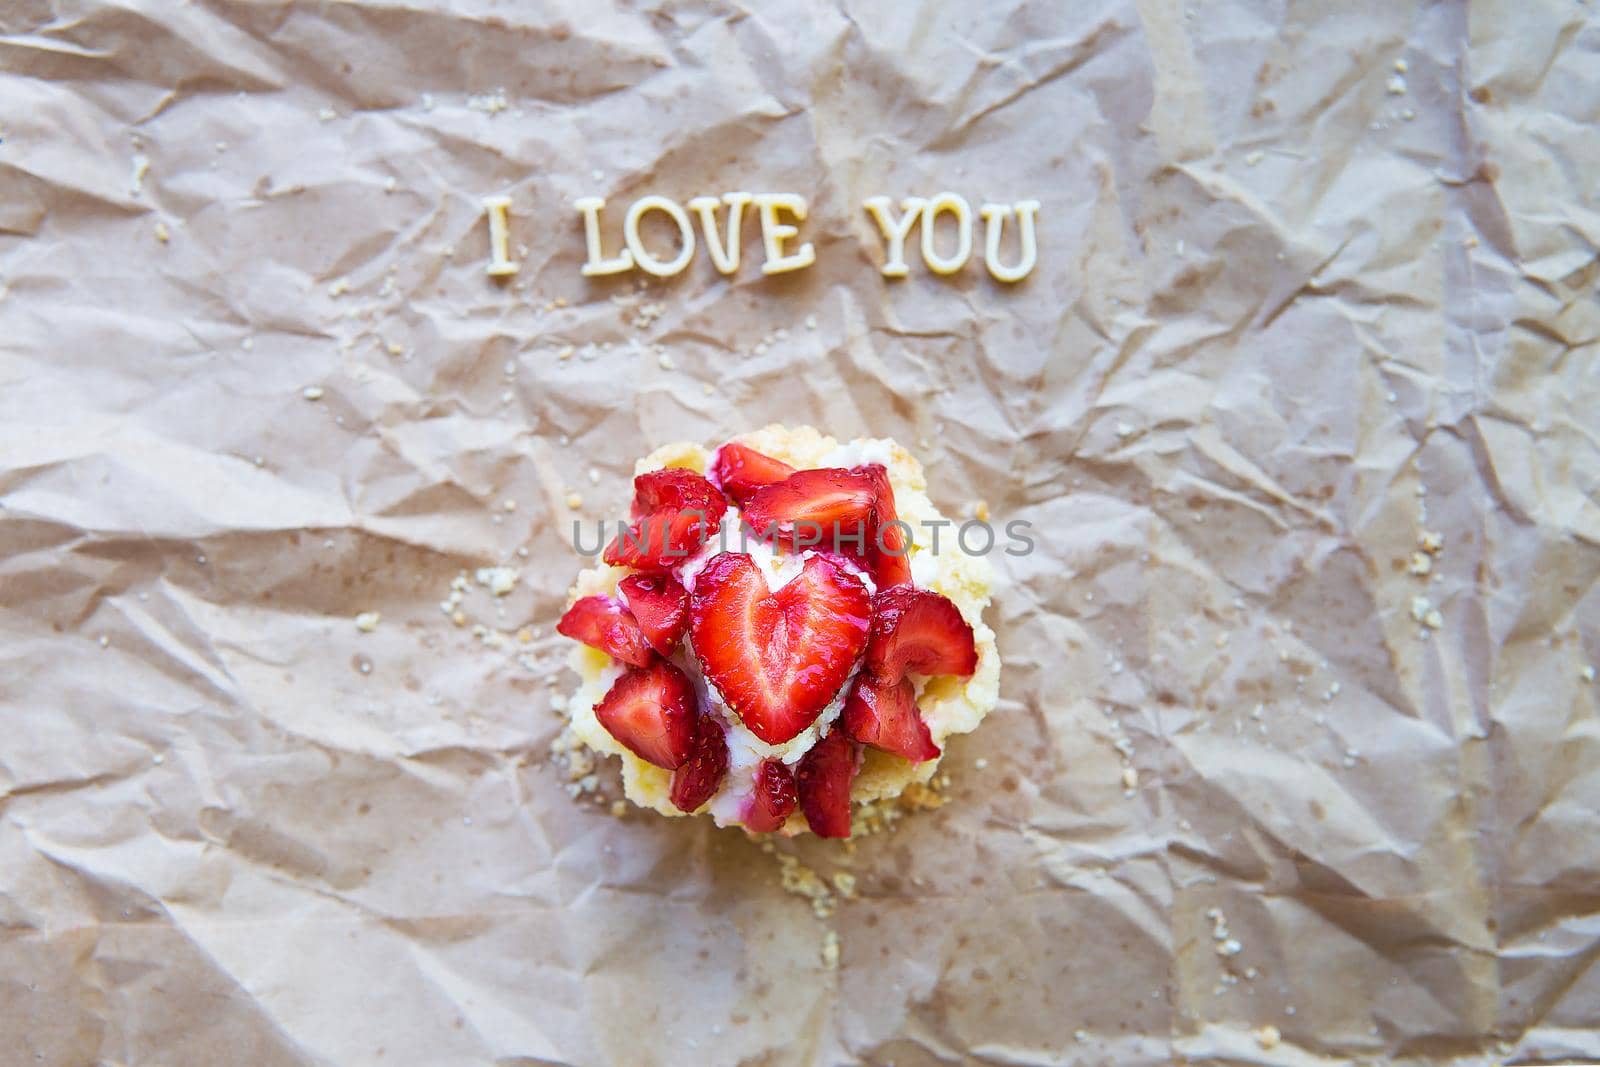 Bright cupcake with strawberries lies on craft paper, the inscription I love you by sfinks